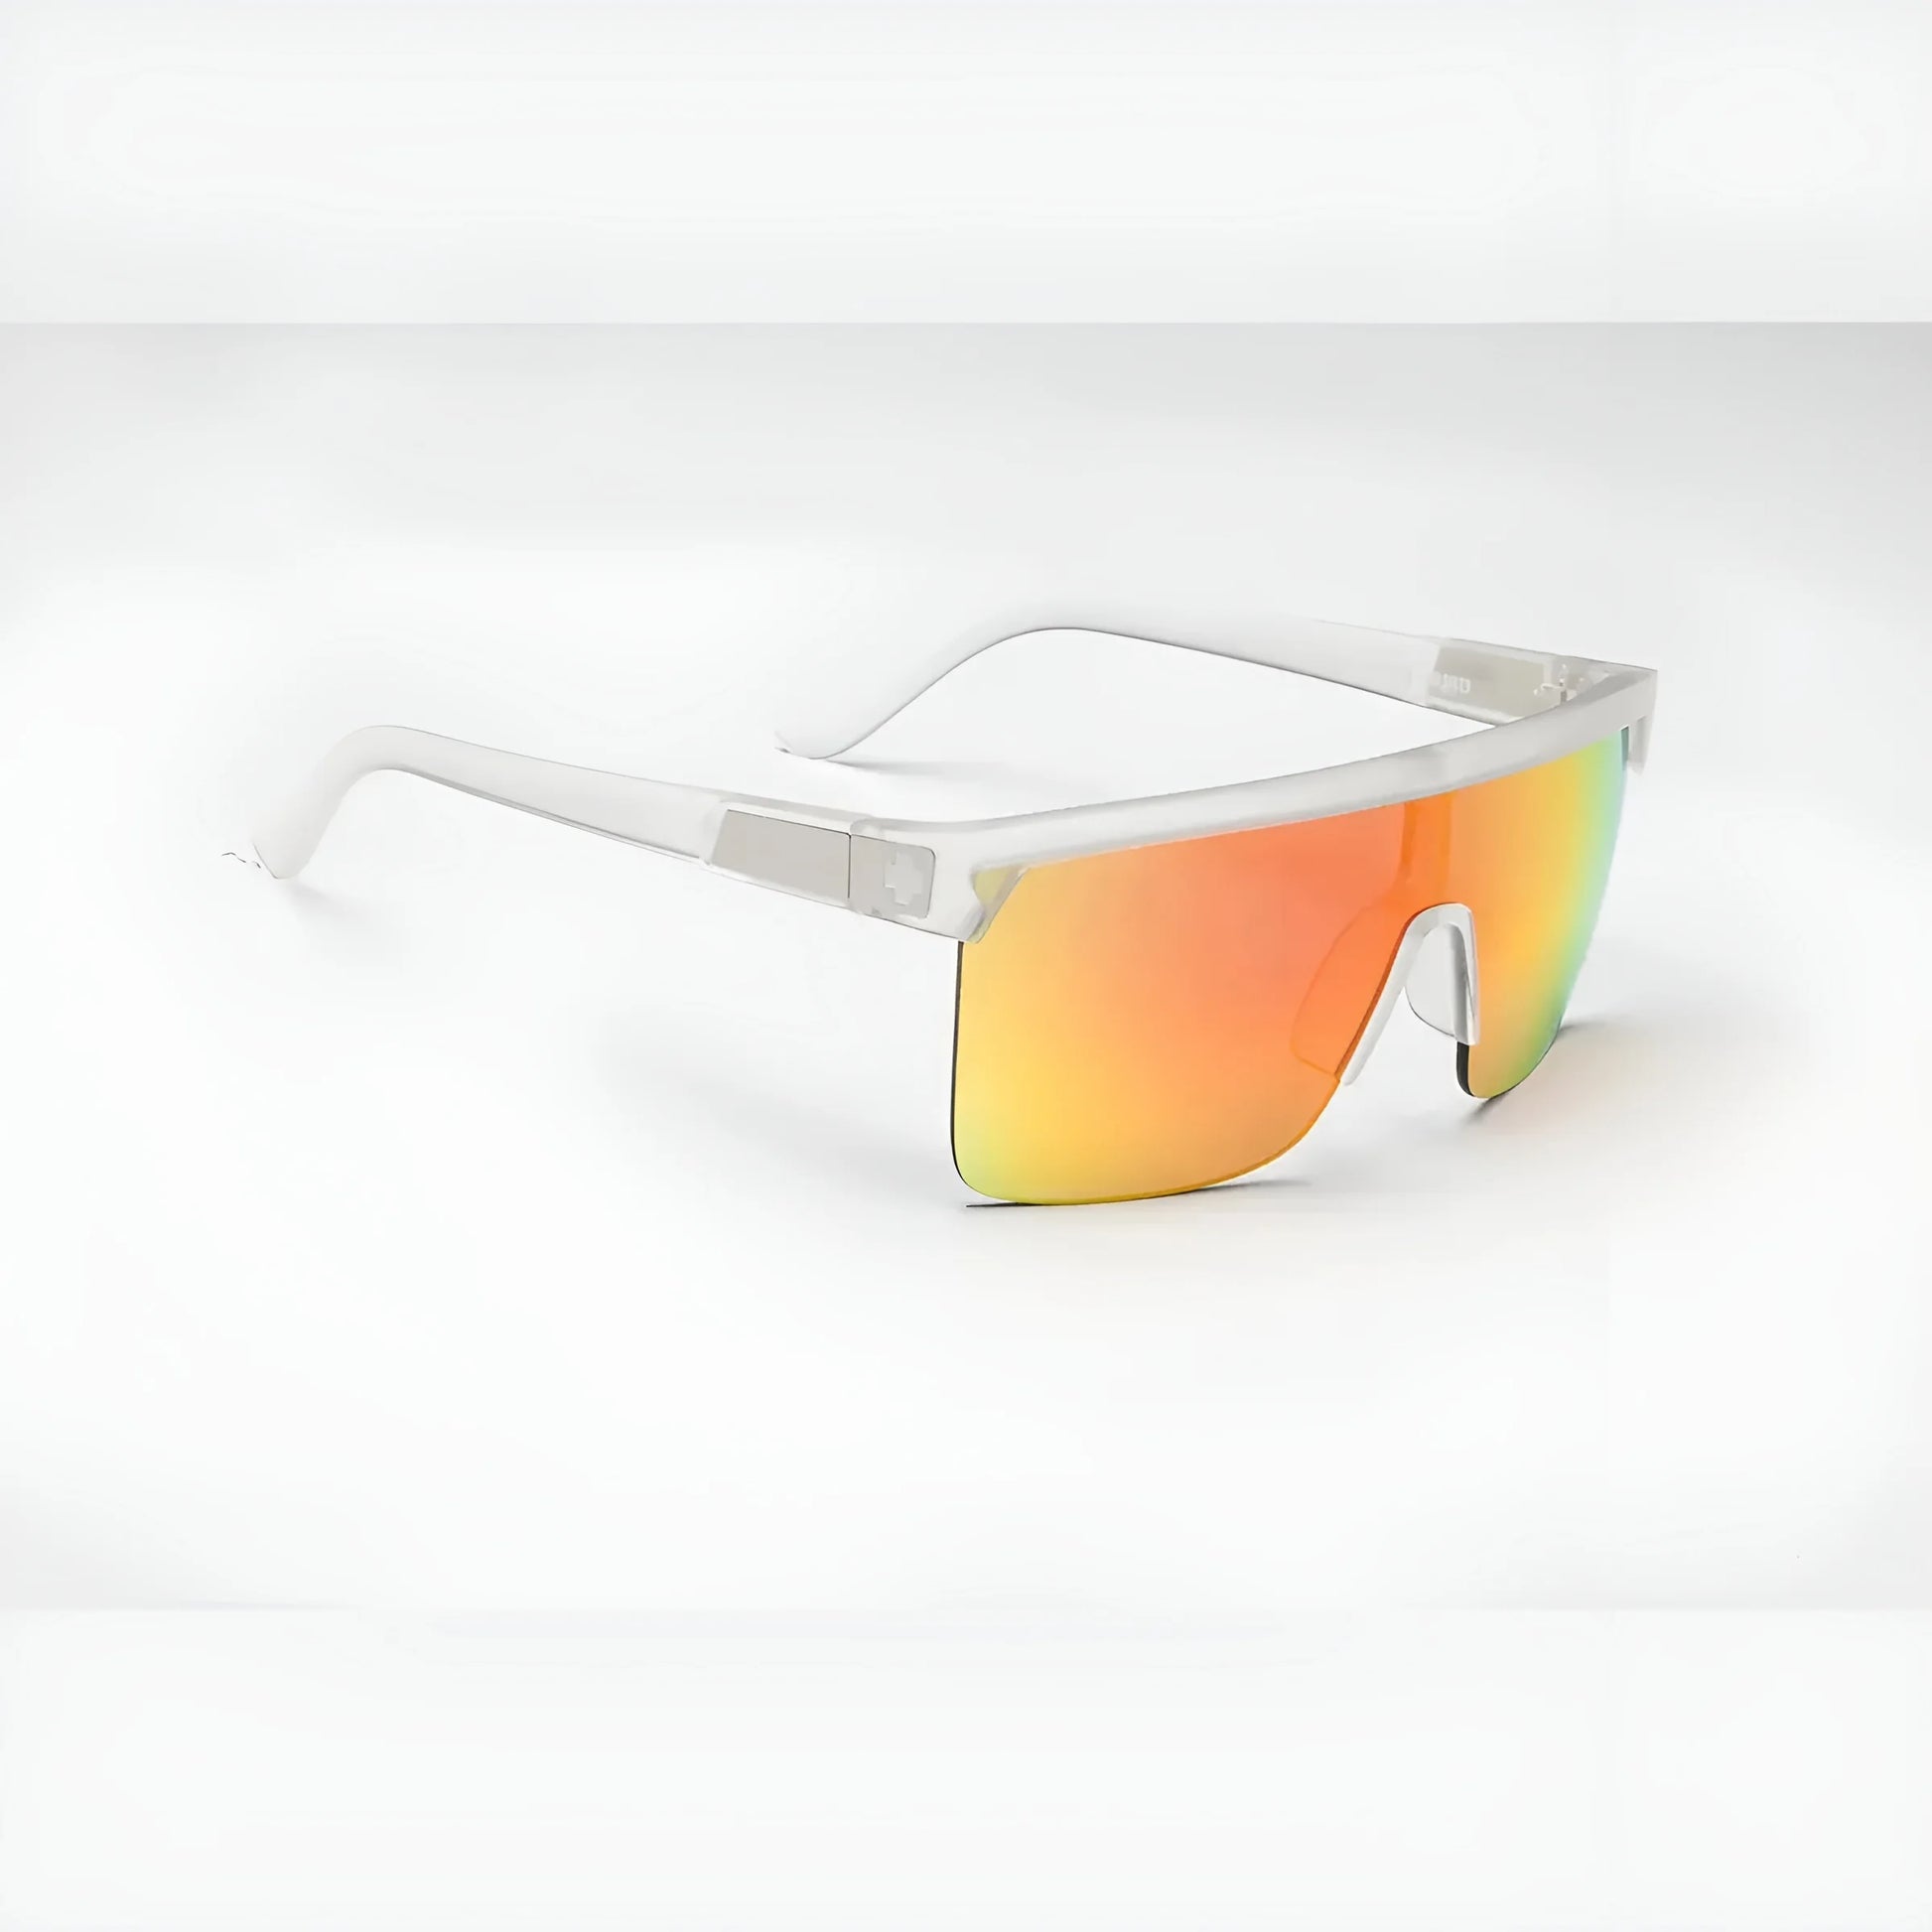 SPY FLYNN 50/50 Sunglasses Crystal Matte / HD Plus Grey Green with Red Spectra Mirror